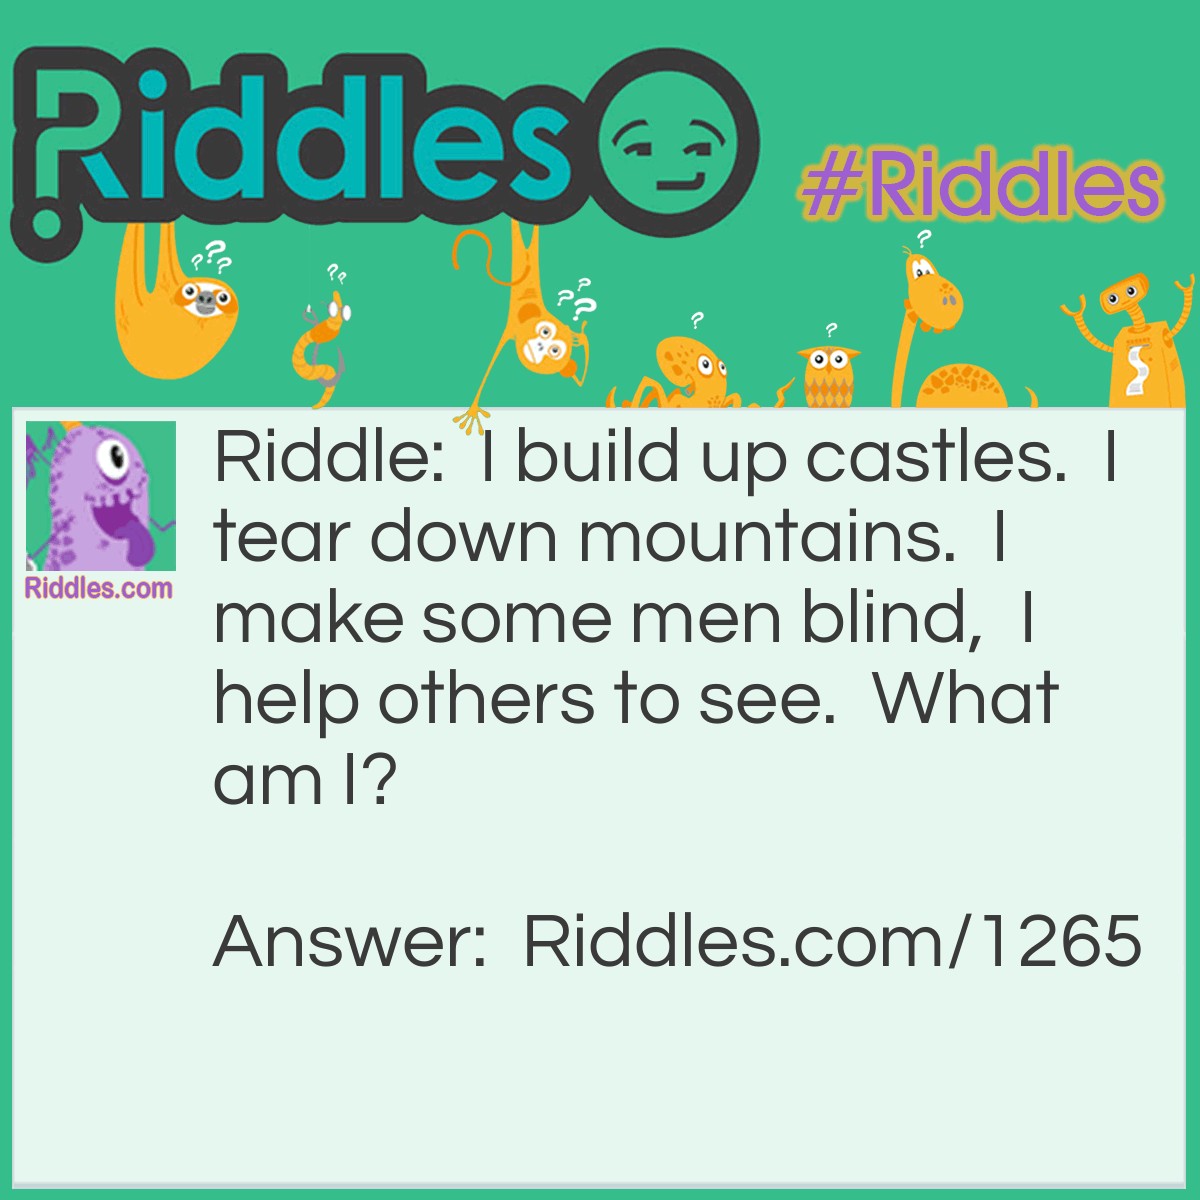 Riddle: I build up castles.  I tear down mountains.  I make some men blind,  I help others to see.  What am I? Answer: sand 